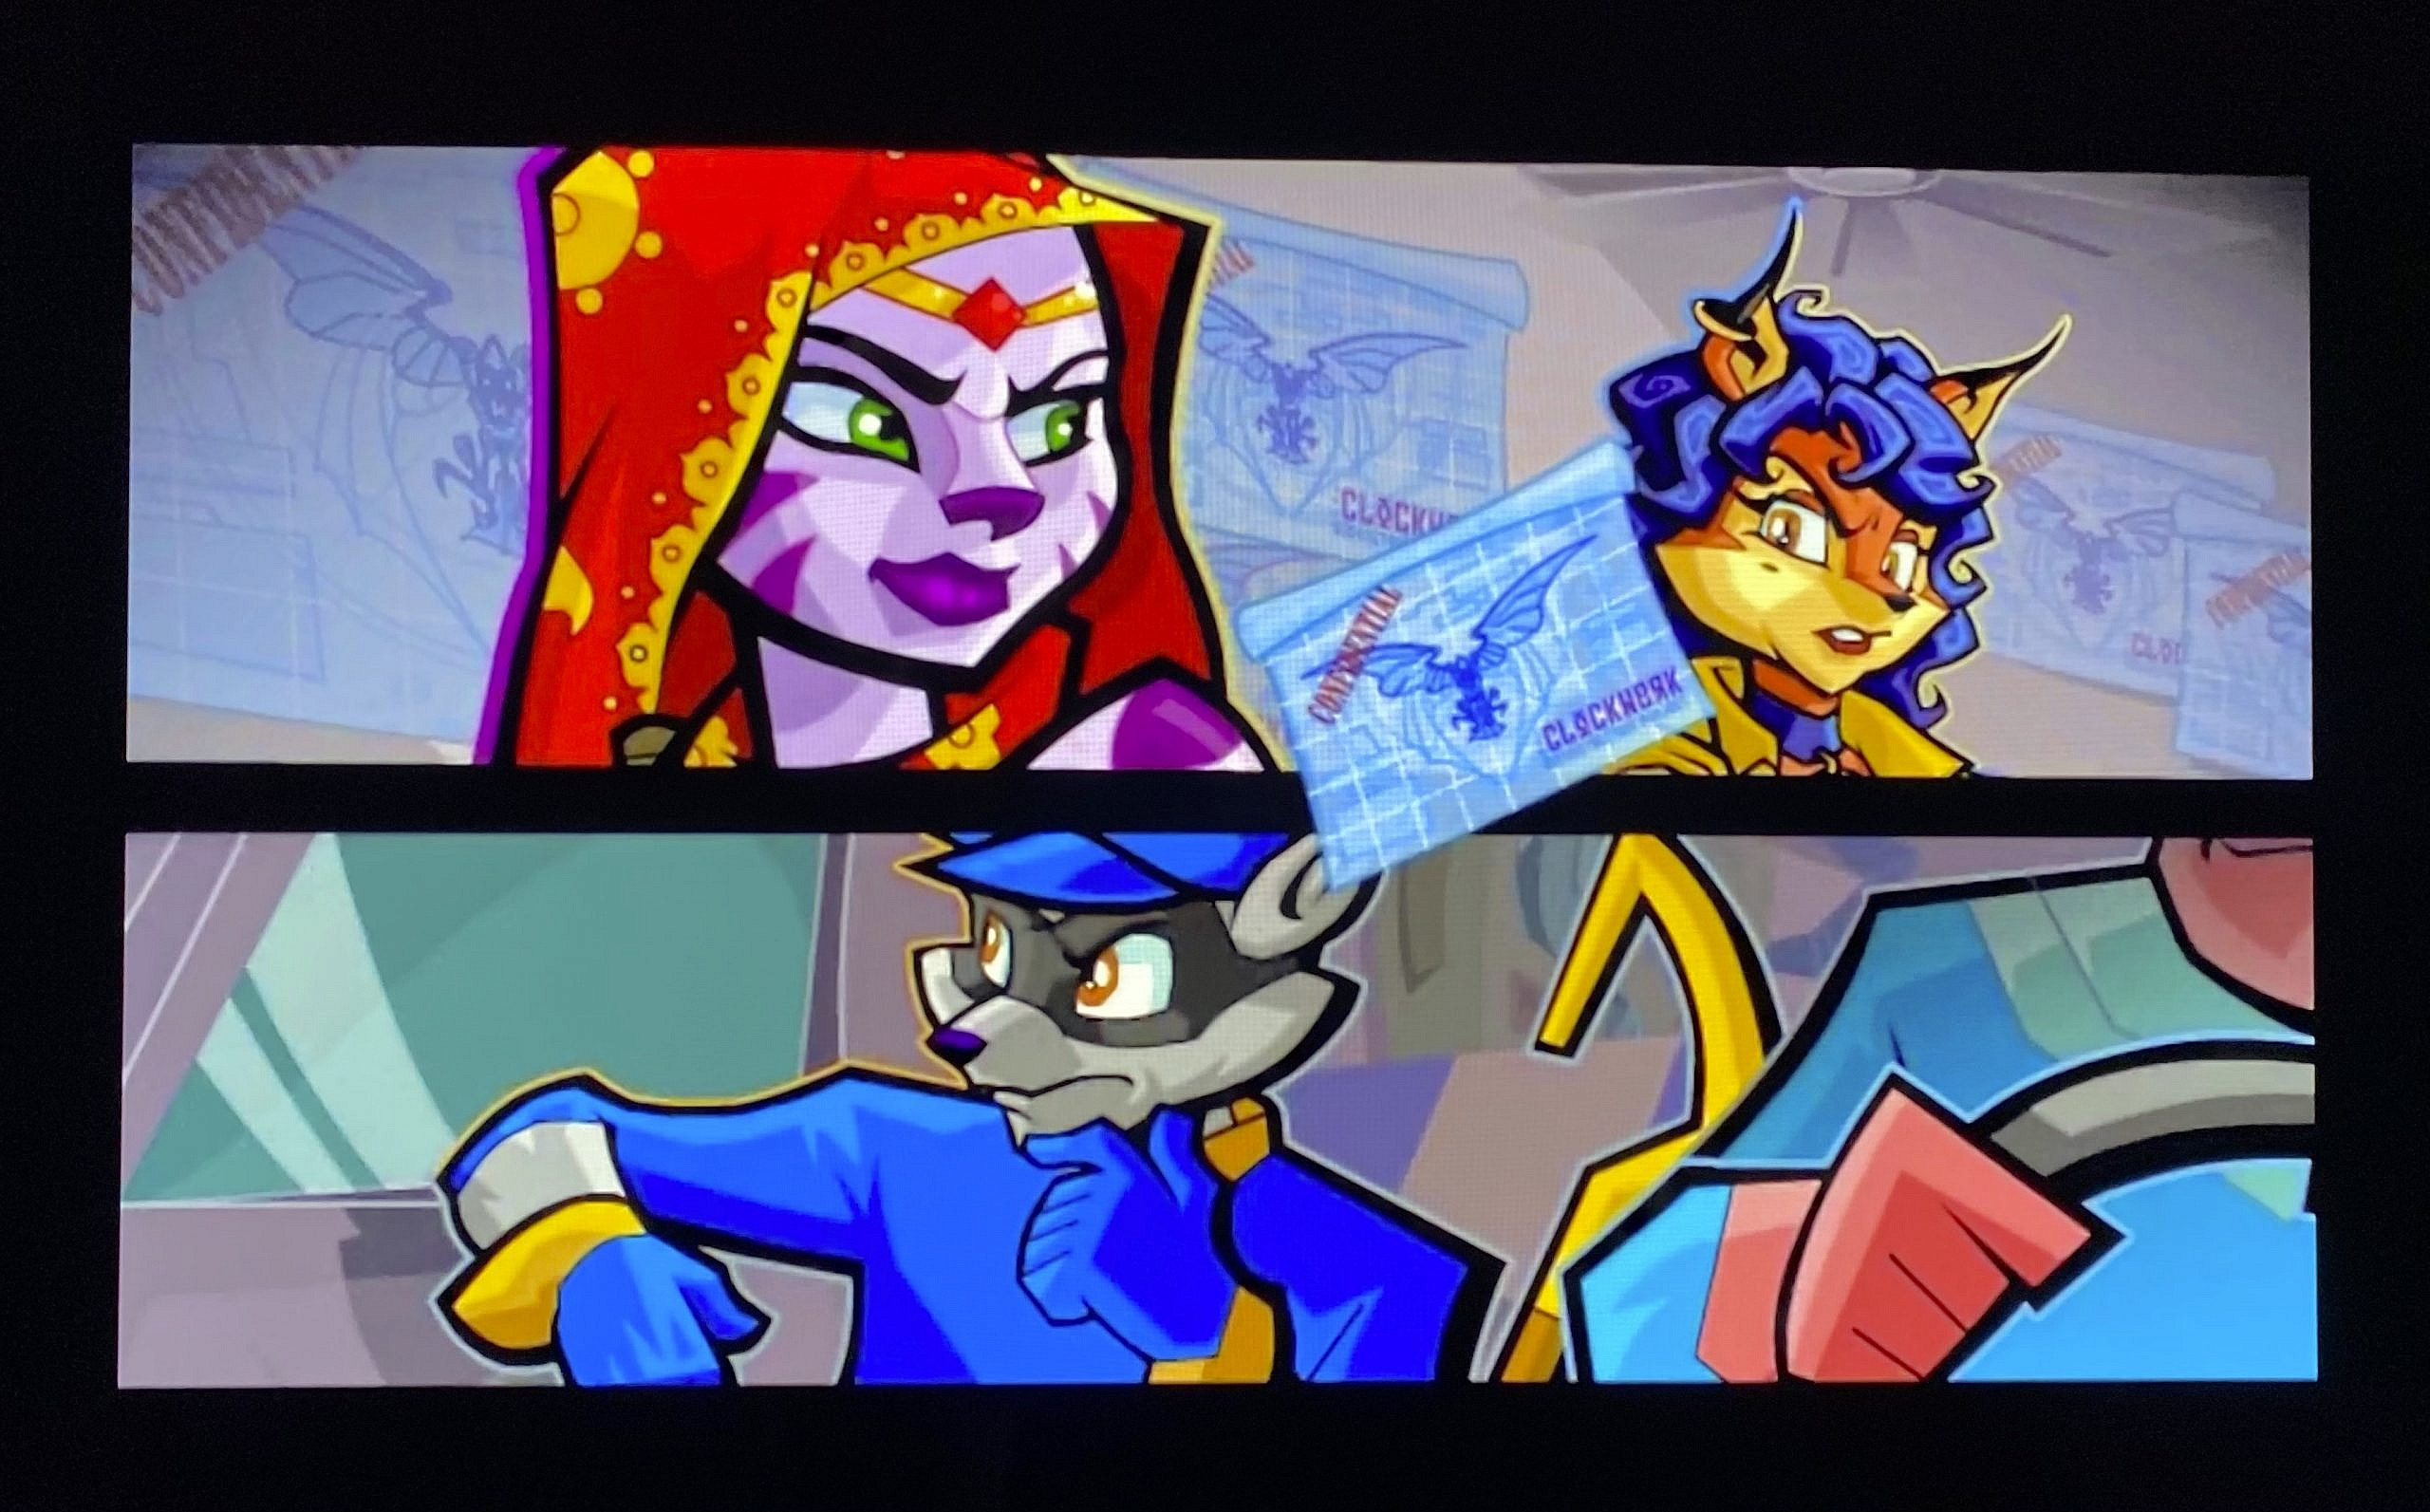 Sly 3 Honor Among Thieves all cutscenes HD GAME 